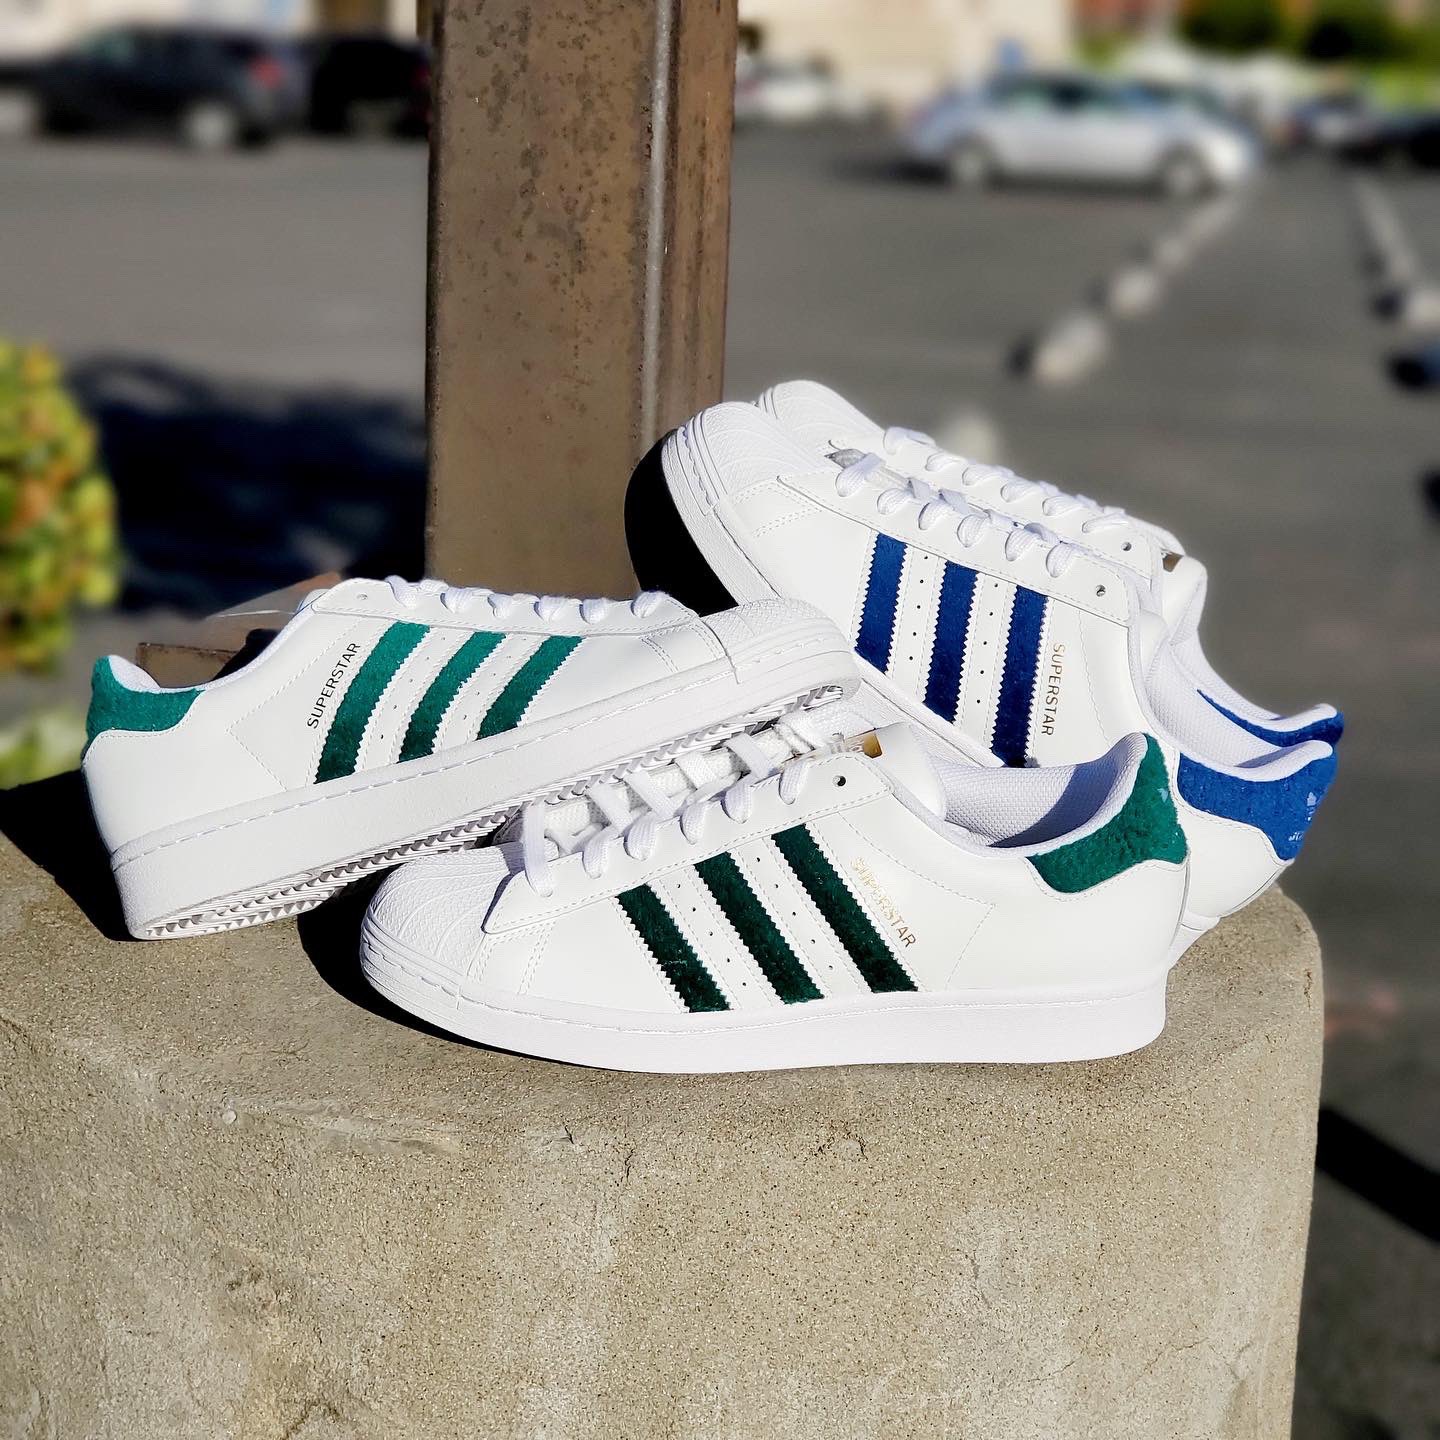 Lingüística amistad Canoa PRIVATE SNEAKERS on Twitter: "🟢ADIDAS SUPERSTAR “CLOUD WHITE GREEN FUR”🟢  . Men Sizes 8-13 $90 • 🔵ADIDAS SUPERSTAR “CLOUD WHITE BLUE FUR”🔵 . Men  Sizes 7.5-13 $90 • Available Now at Long